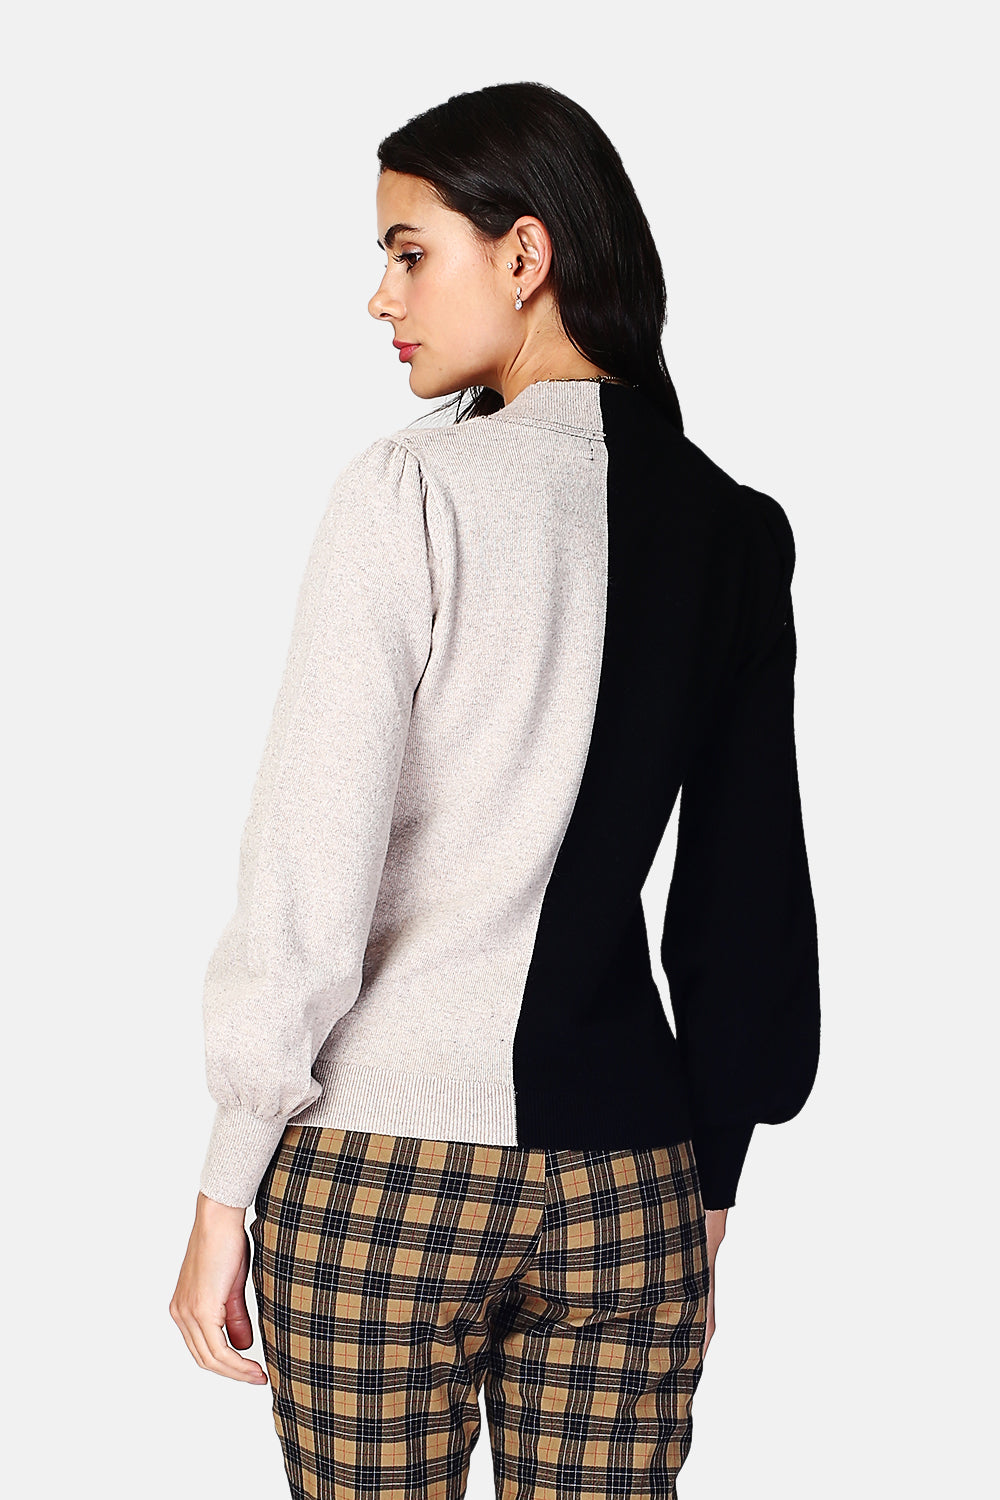 Sweater with large V neckline, long sleeves, slightly puffy two-tone